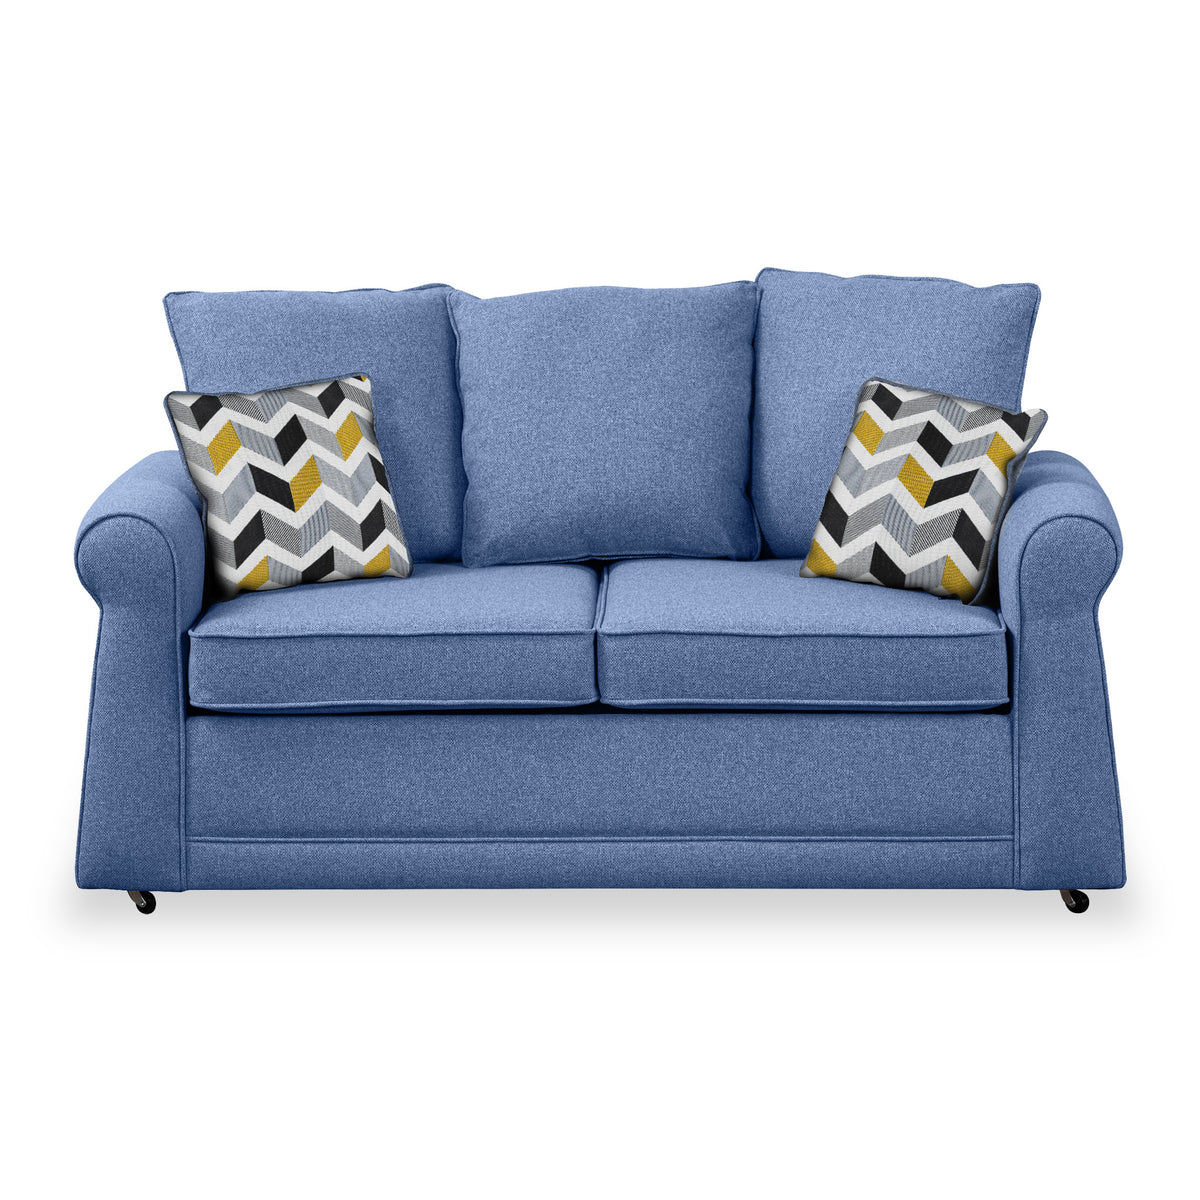 Broughton Denim Faux Linen 2 Seater Sofabed with Mustard Scatter Cushions from Roseland Furniture